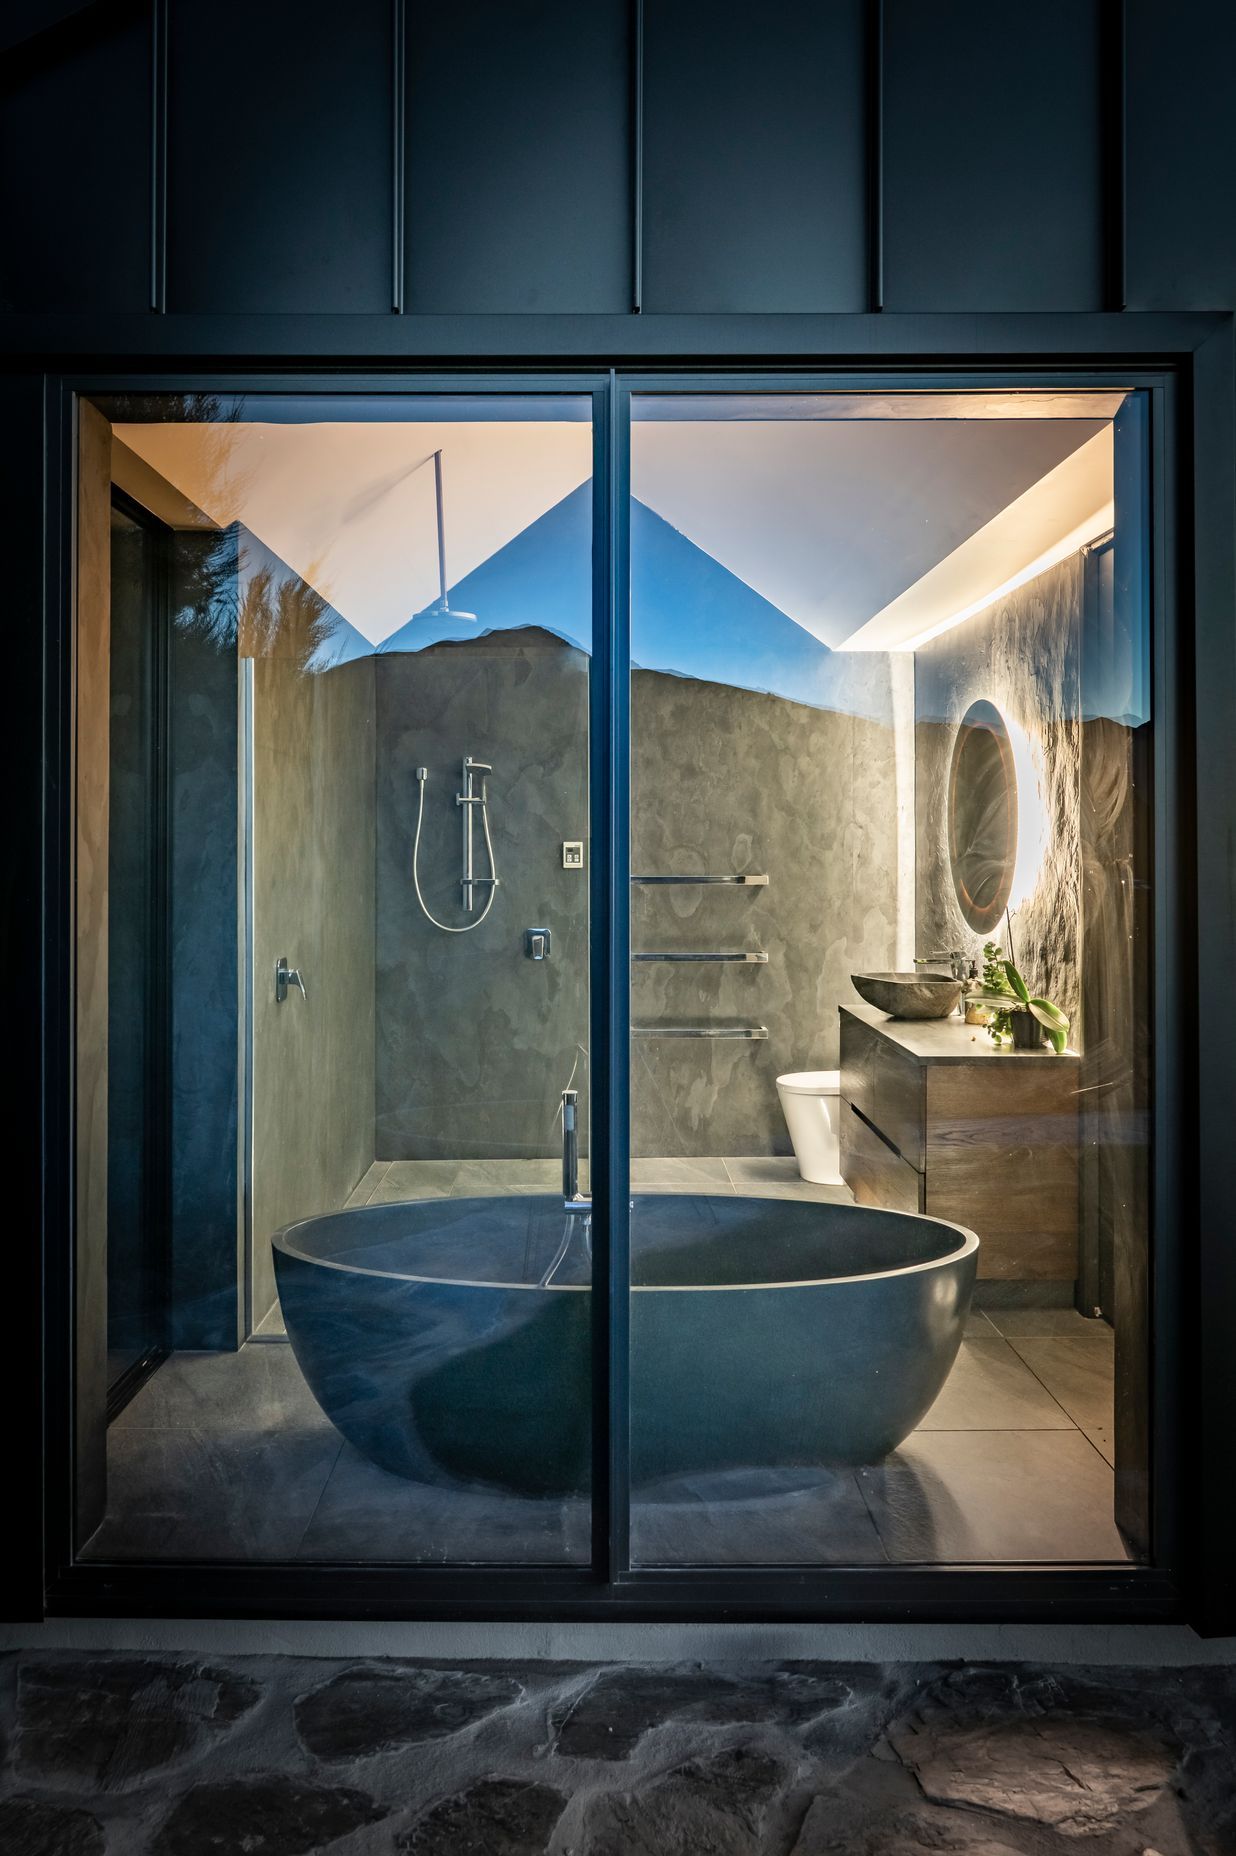 An exterior view of the bathroom with its striking black stone oval-shaped bath.